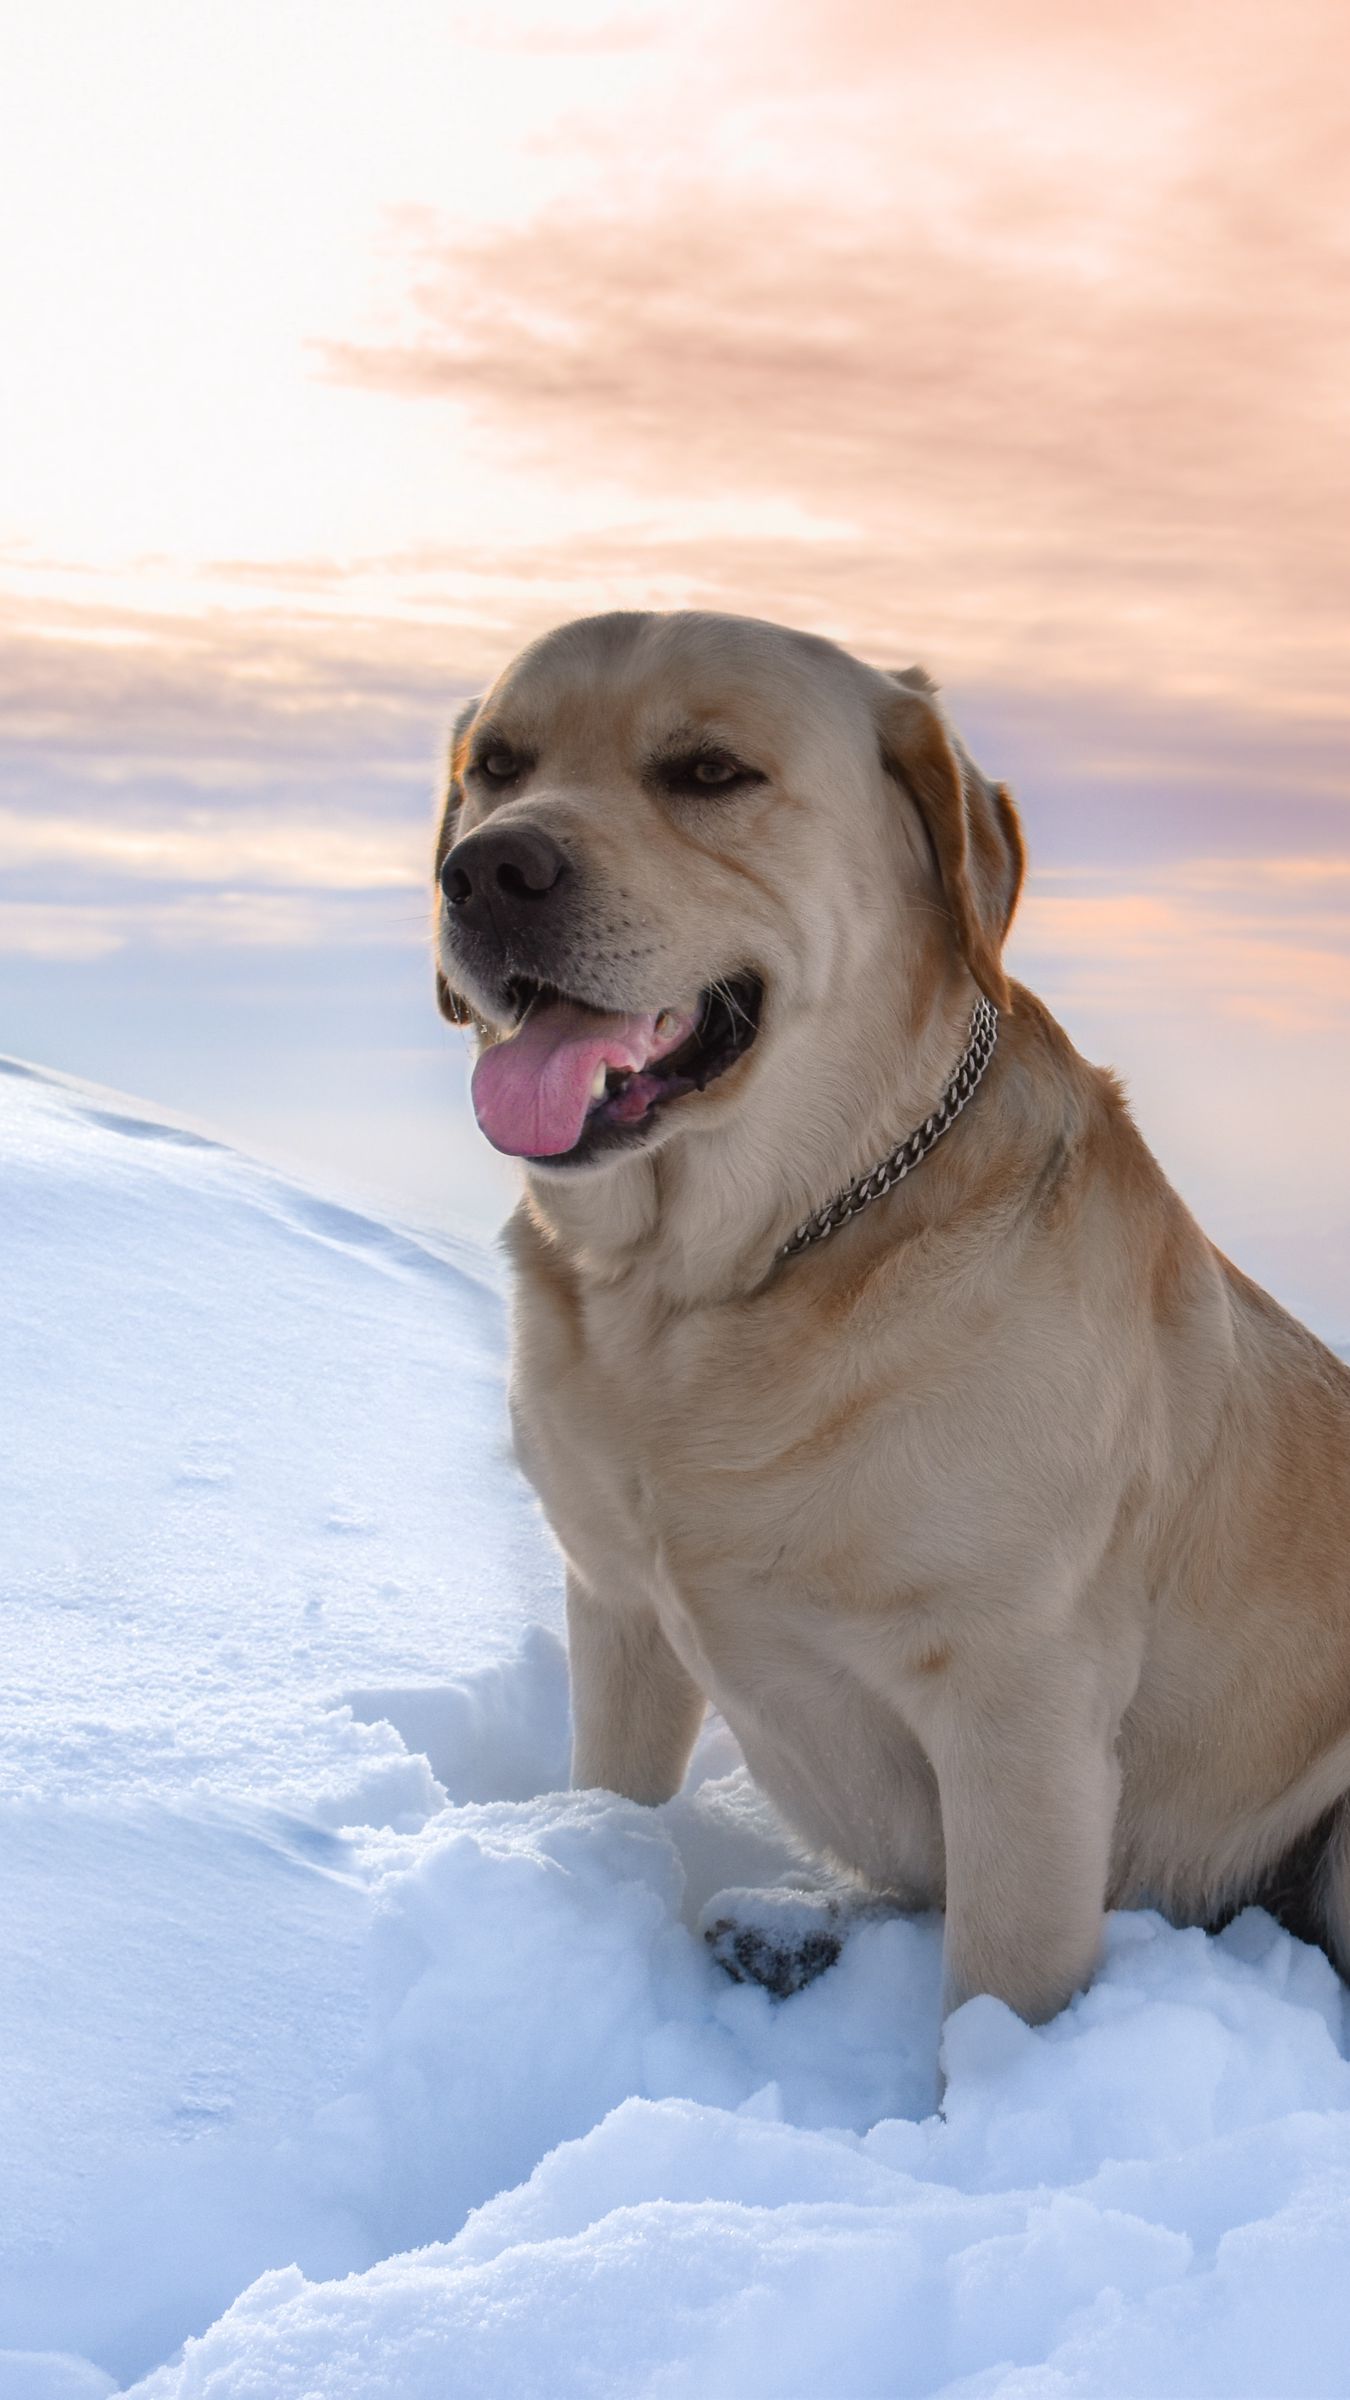 Download wallpaper 1350x2400 labrador, dog, snow, mountains iphone  8+/7+/6s+/6+ for parallax hd background